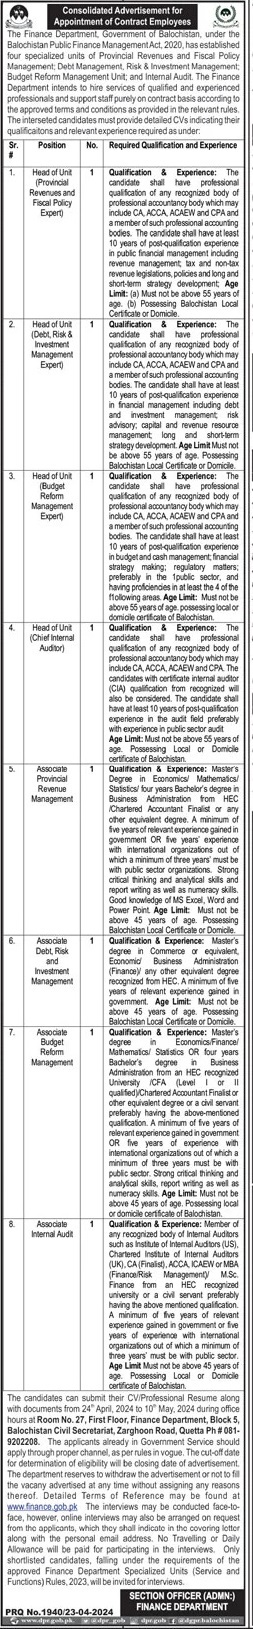 Consolidated Advertisement for Appointment of Contract Employees in Finance Department Balochistan